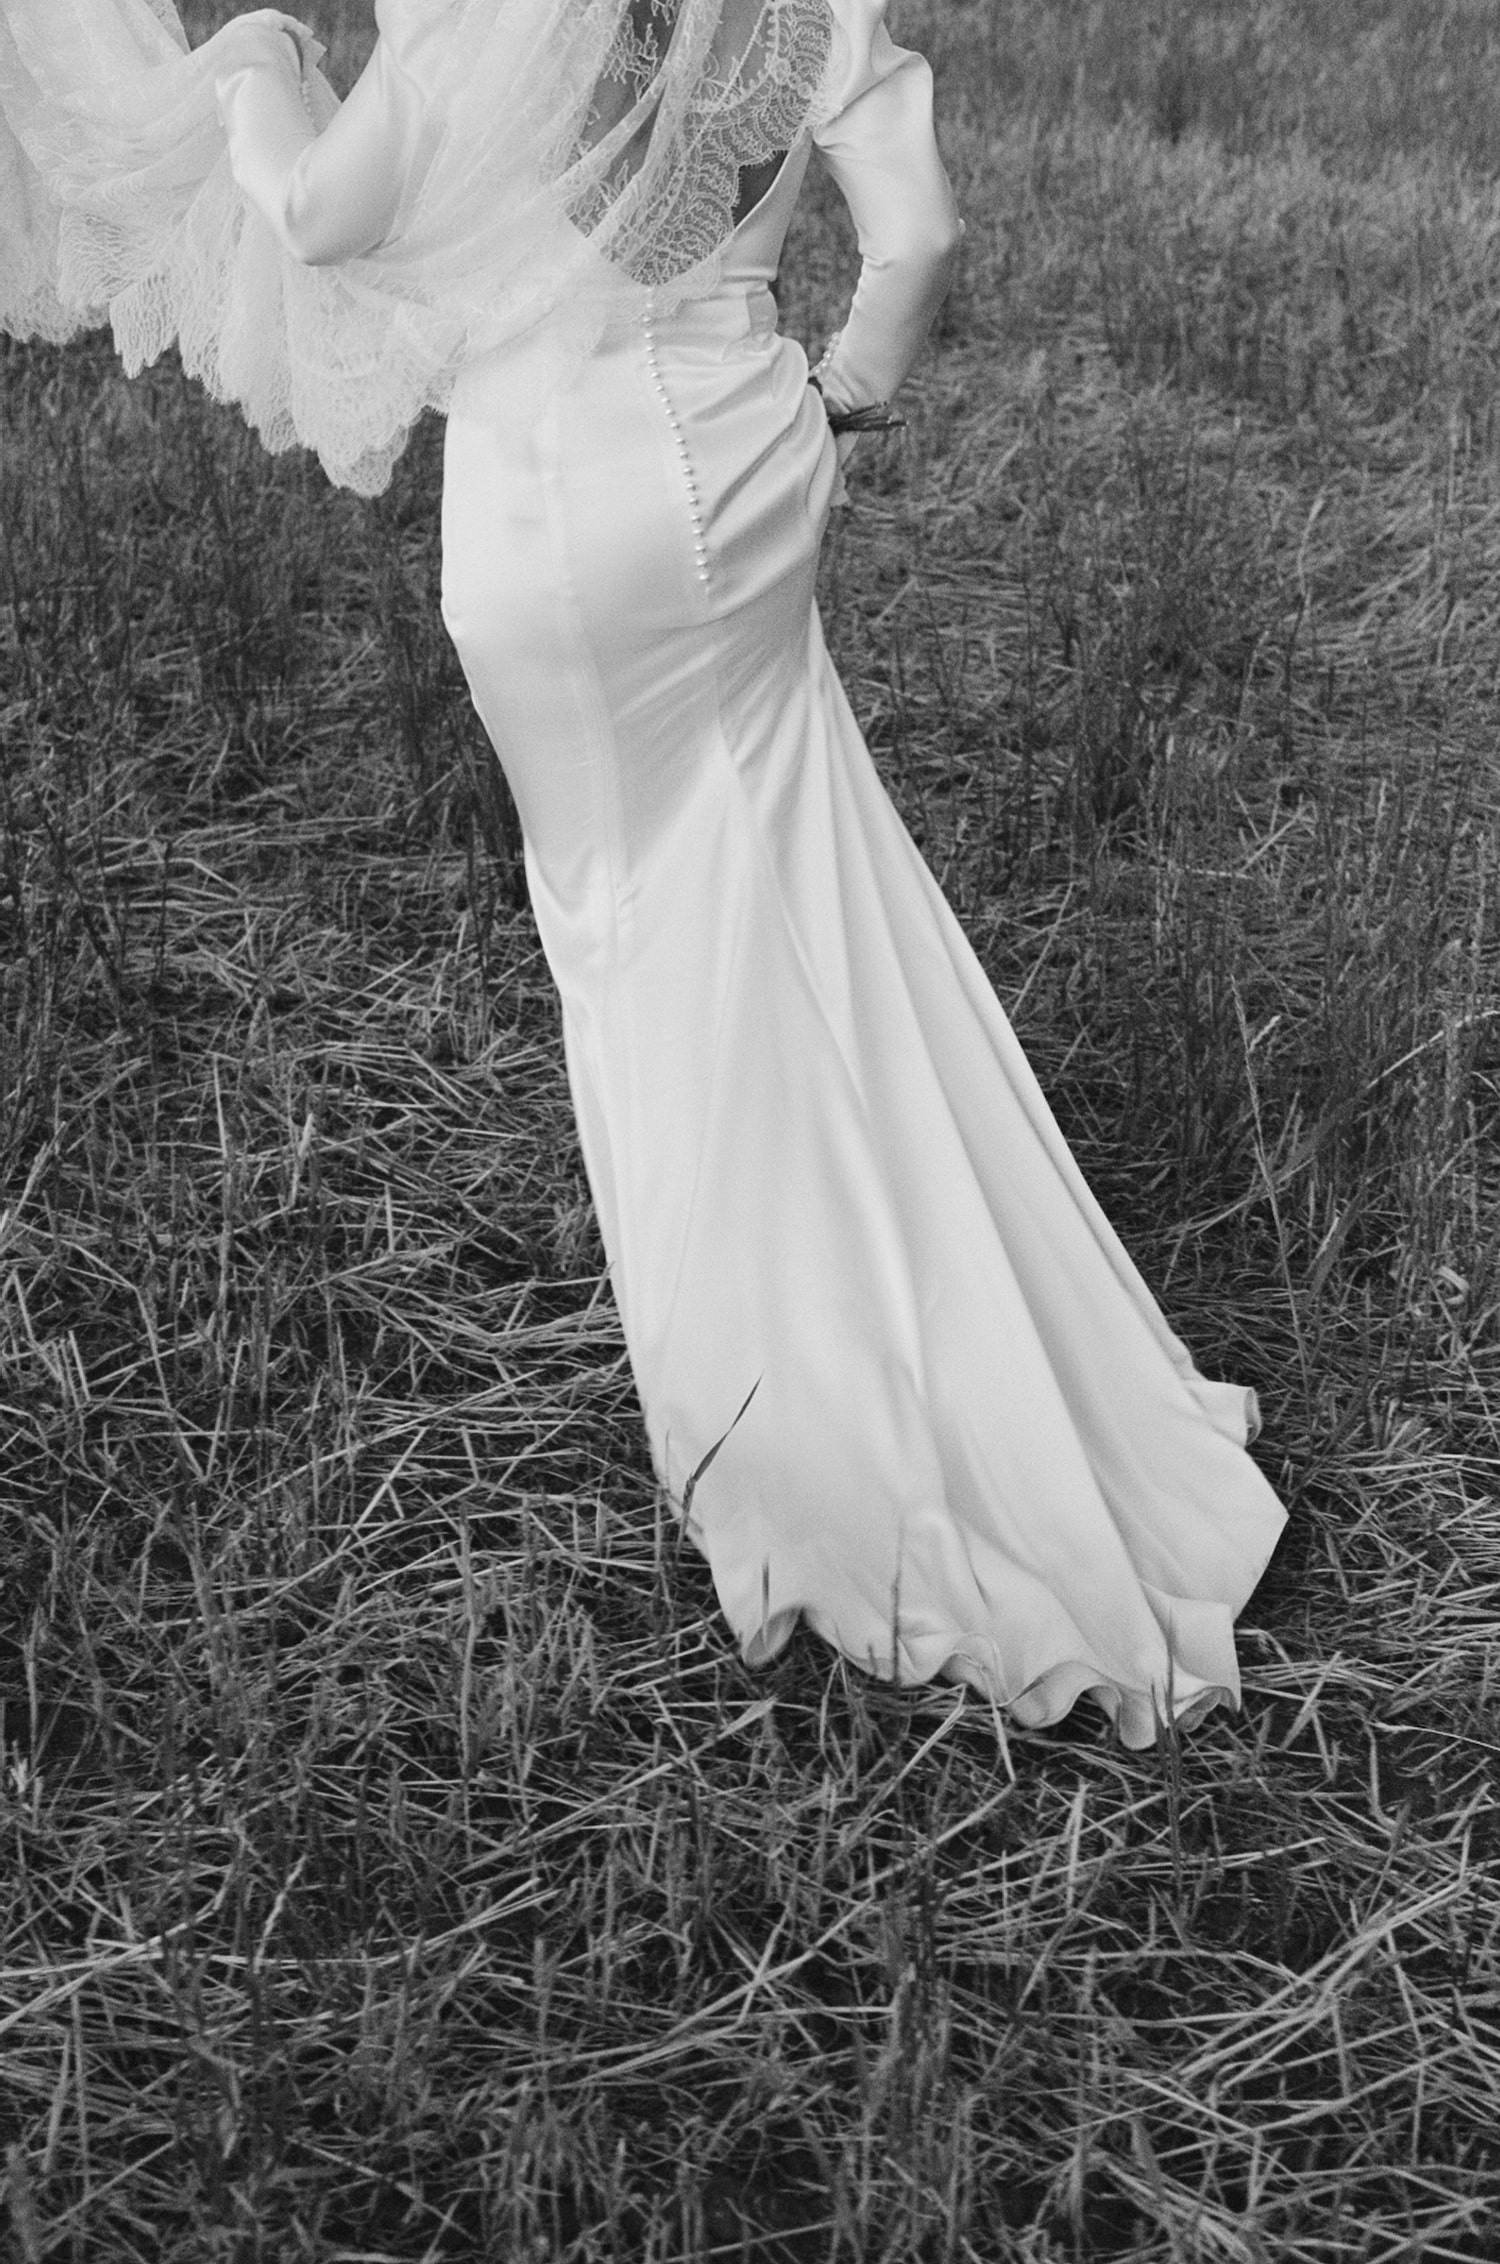 Back view of bride's gown while she is walking.